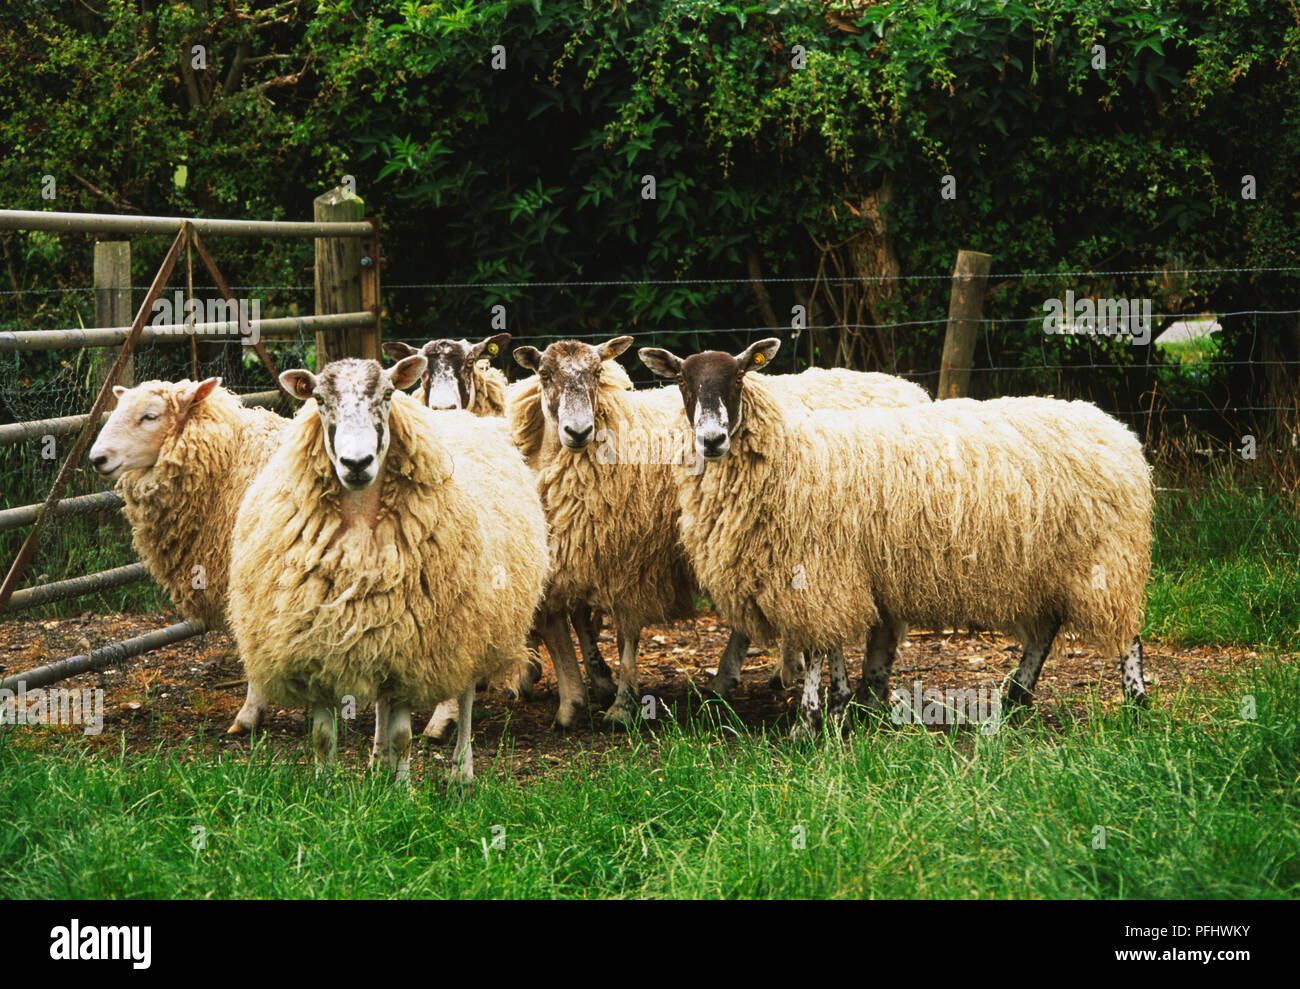 Herd of sheep by field gate, front view Stock Photo